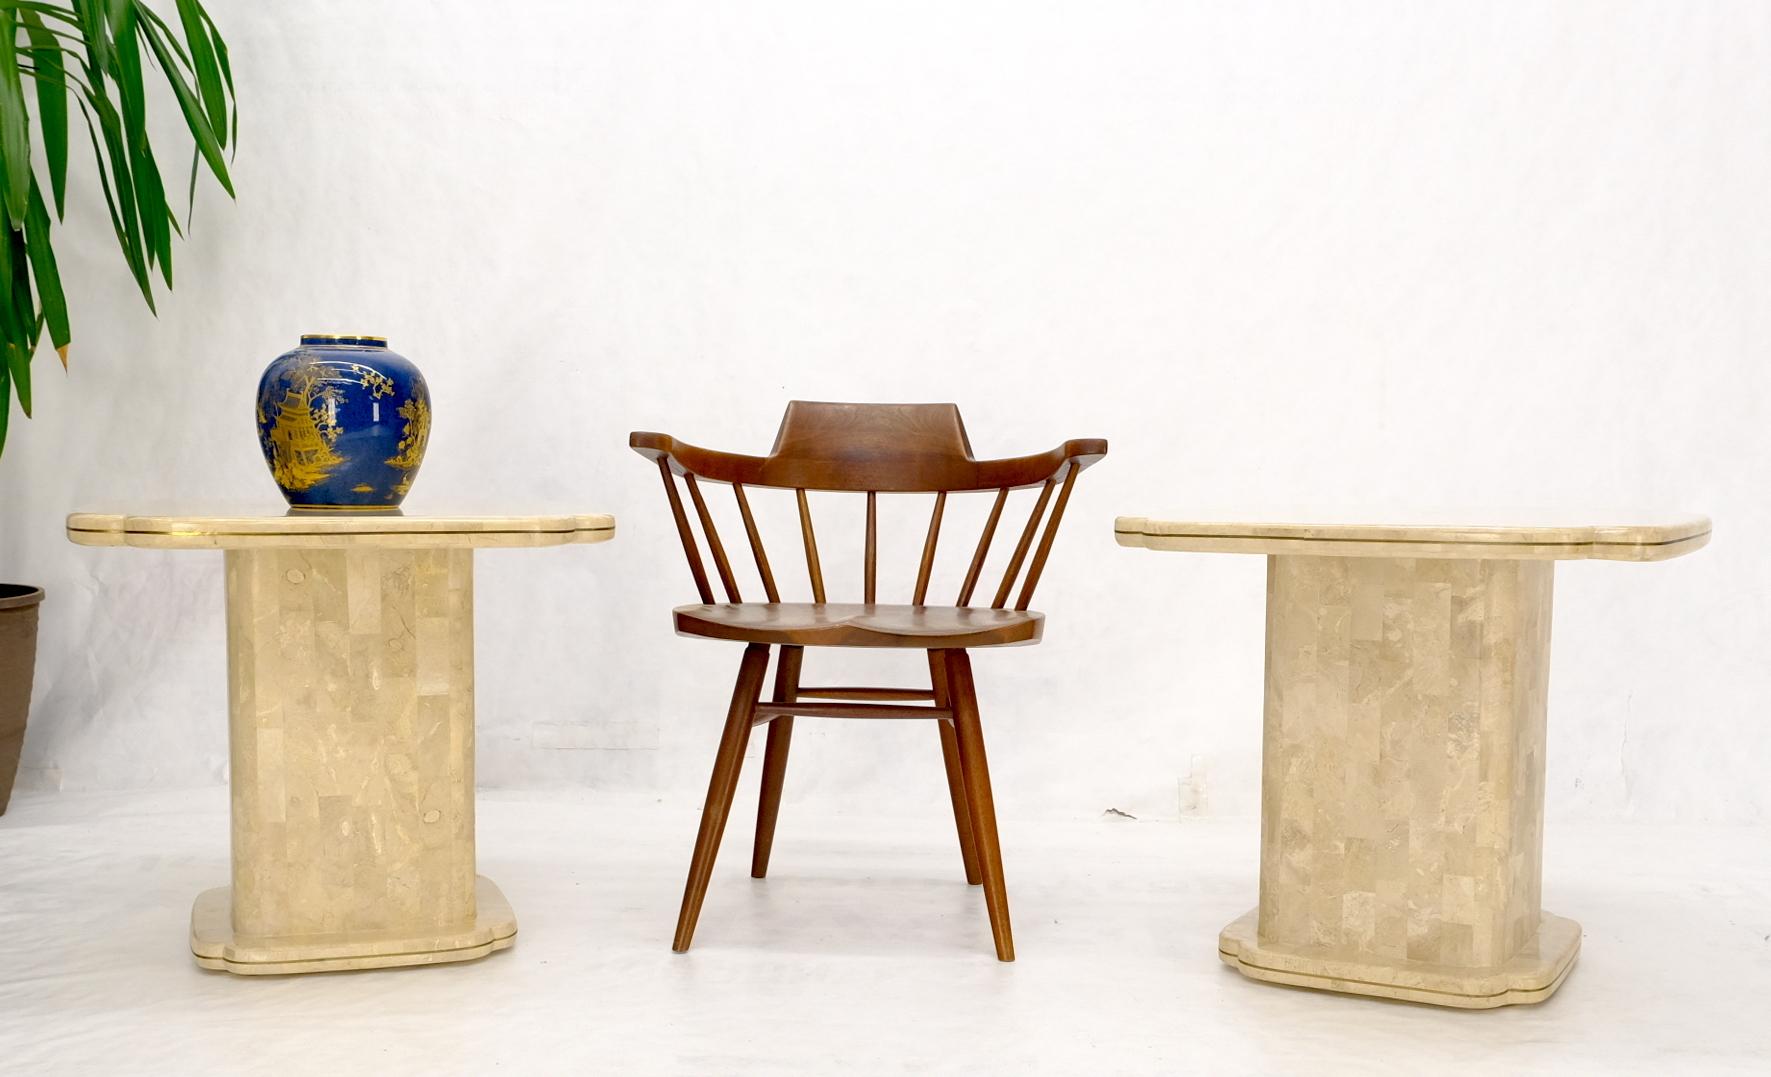 Pair of Tessellated Stone Brass Trim Mid-Century Modern End Tables Stands In Good Condition For Sale In Rockaway, NJ